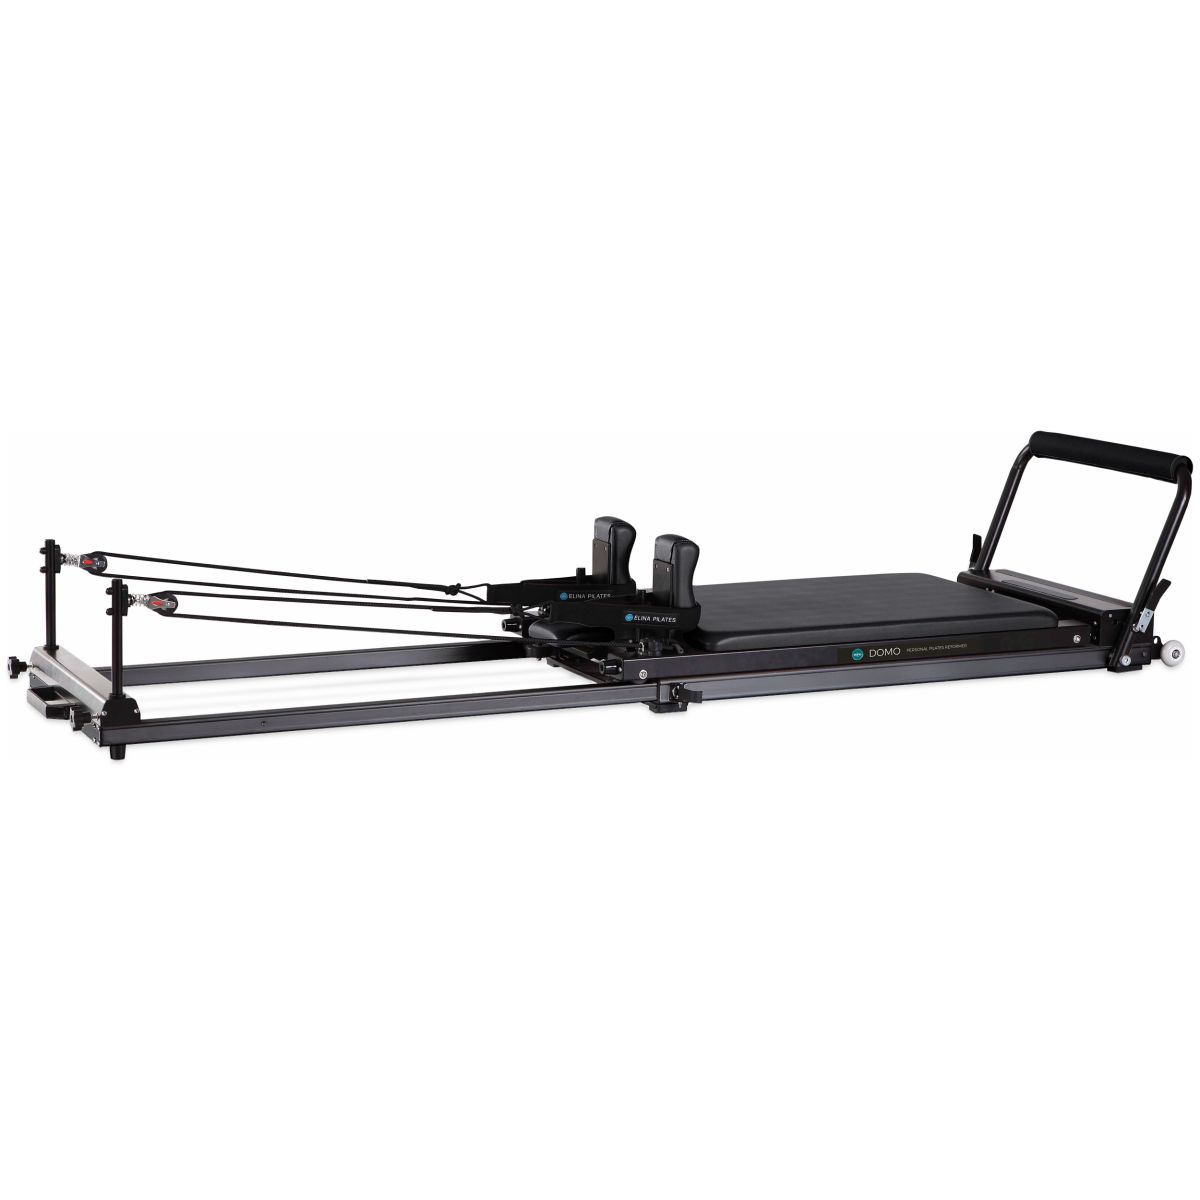 Footbar Cover Installation for the Allegro® Reformer and the